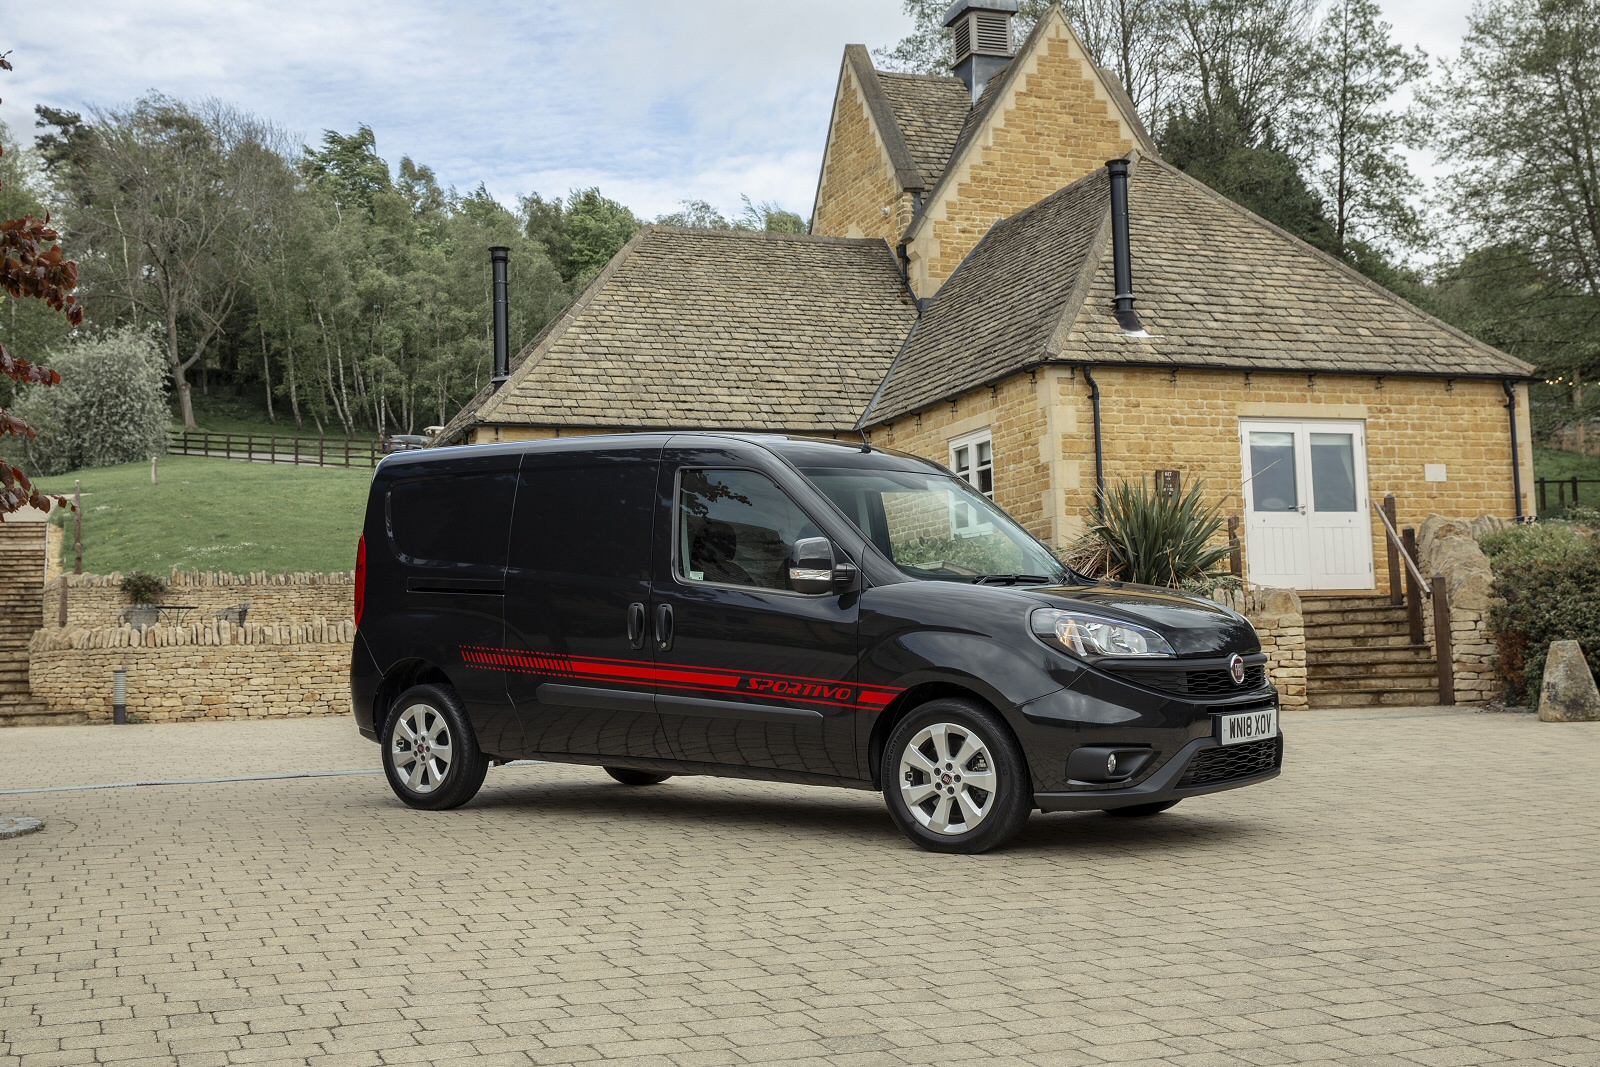 FIAT DOBLO Leasing & Contract Hire